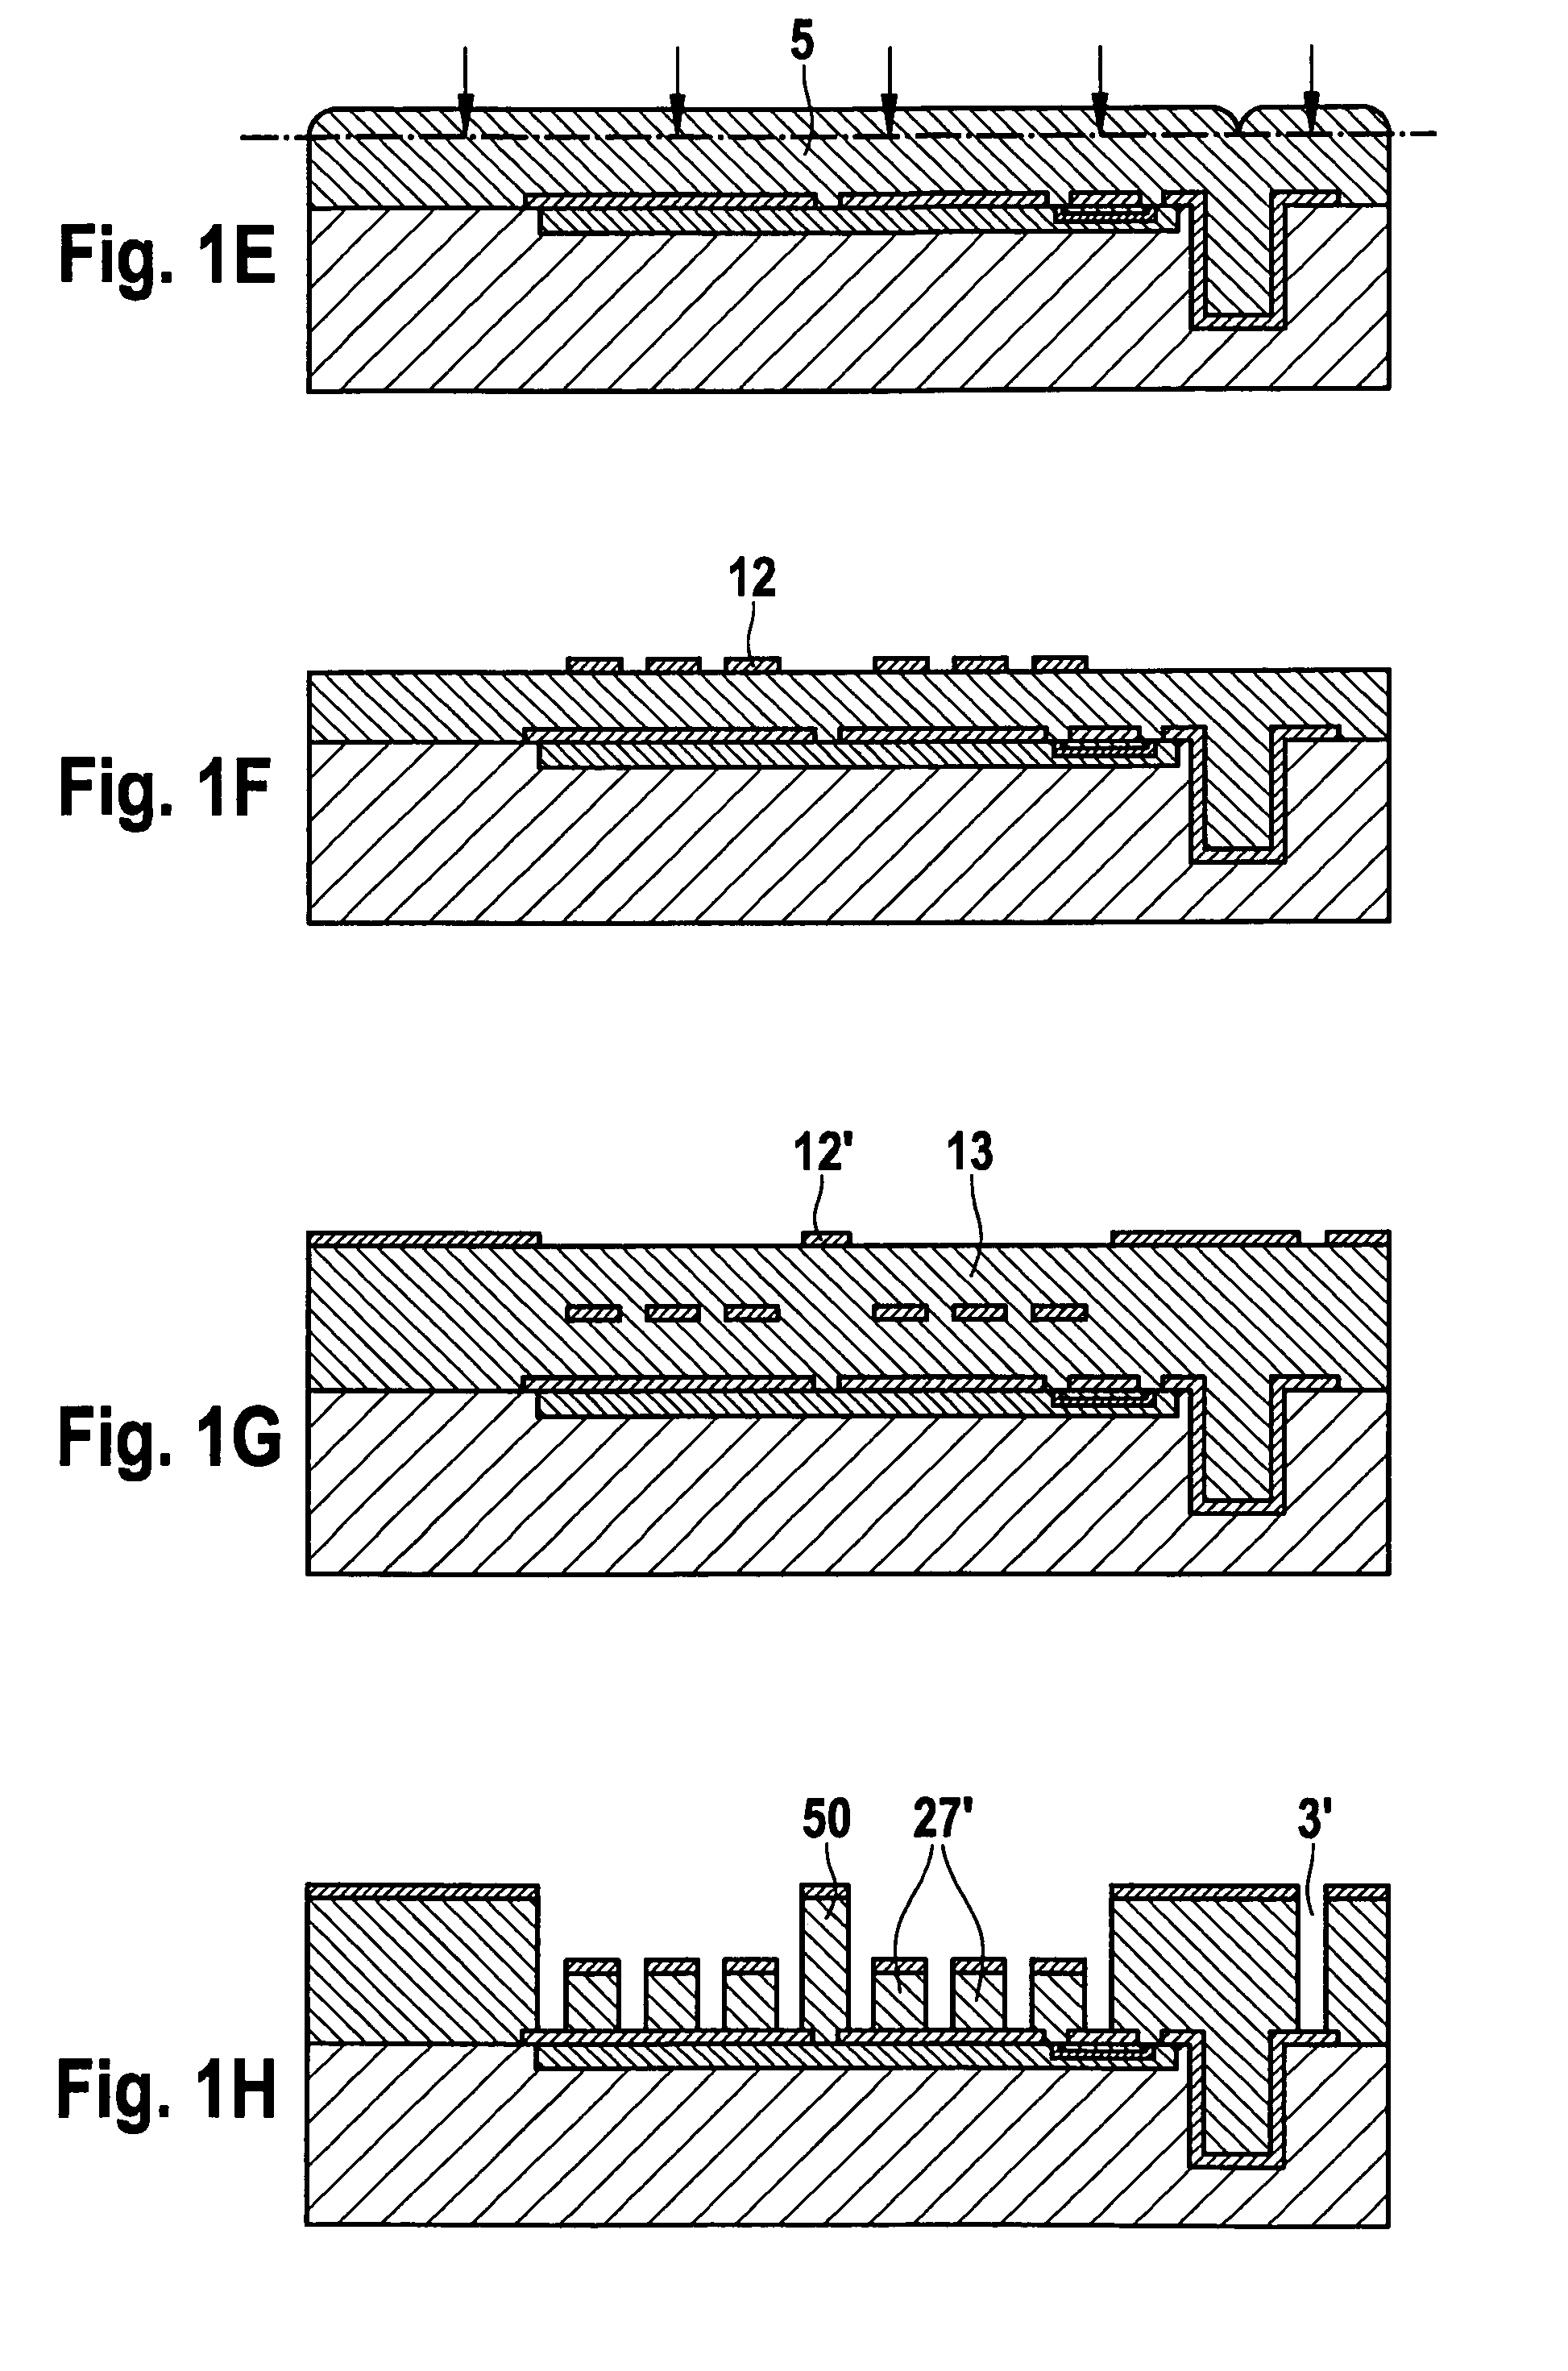 Method for producing a micromechanical component having a filler layer and a masking layer